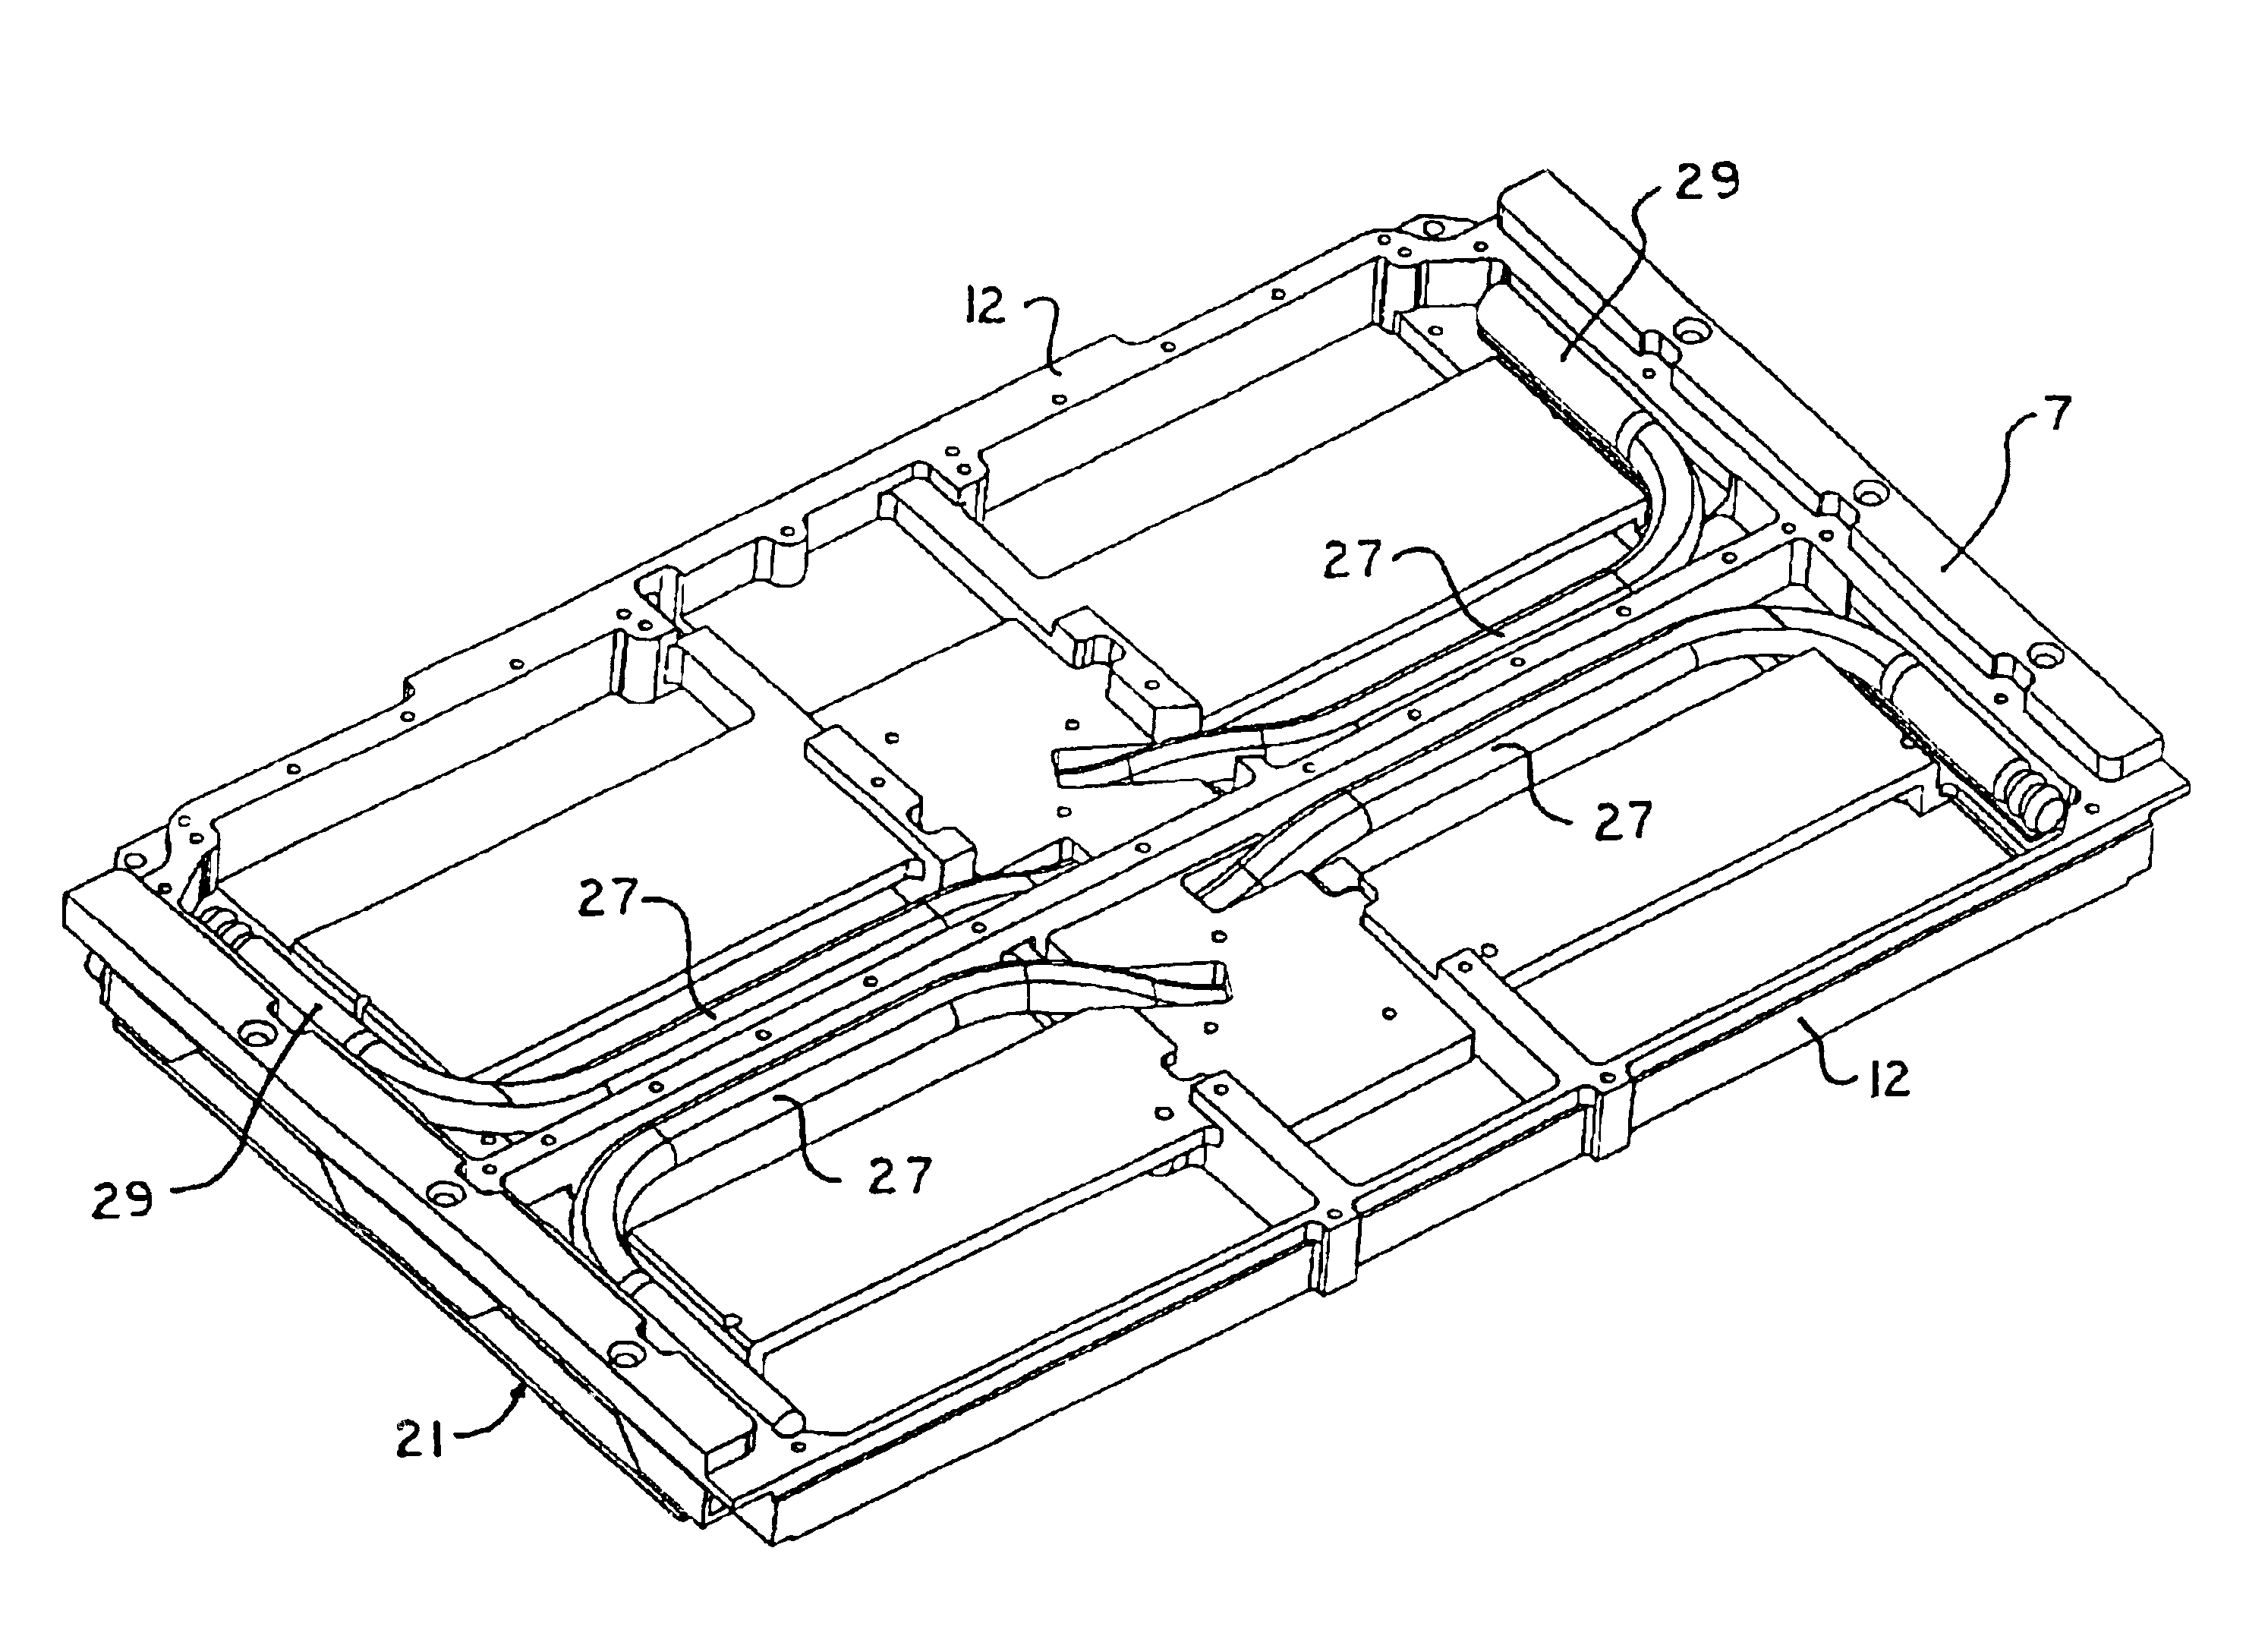 Embedded heat pipe for a conduction cooled circuit card assembly